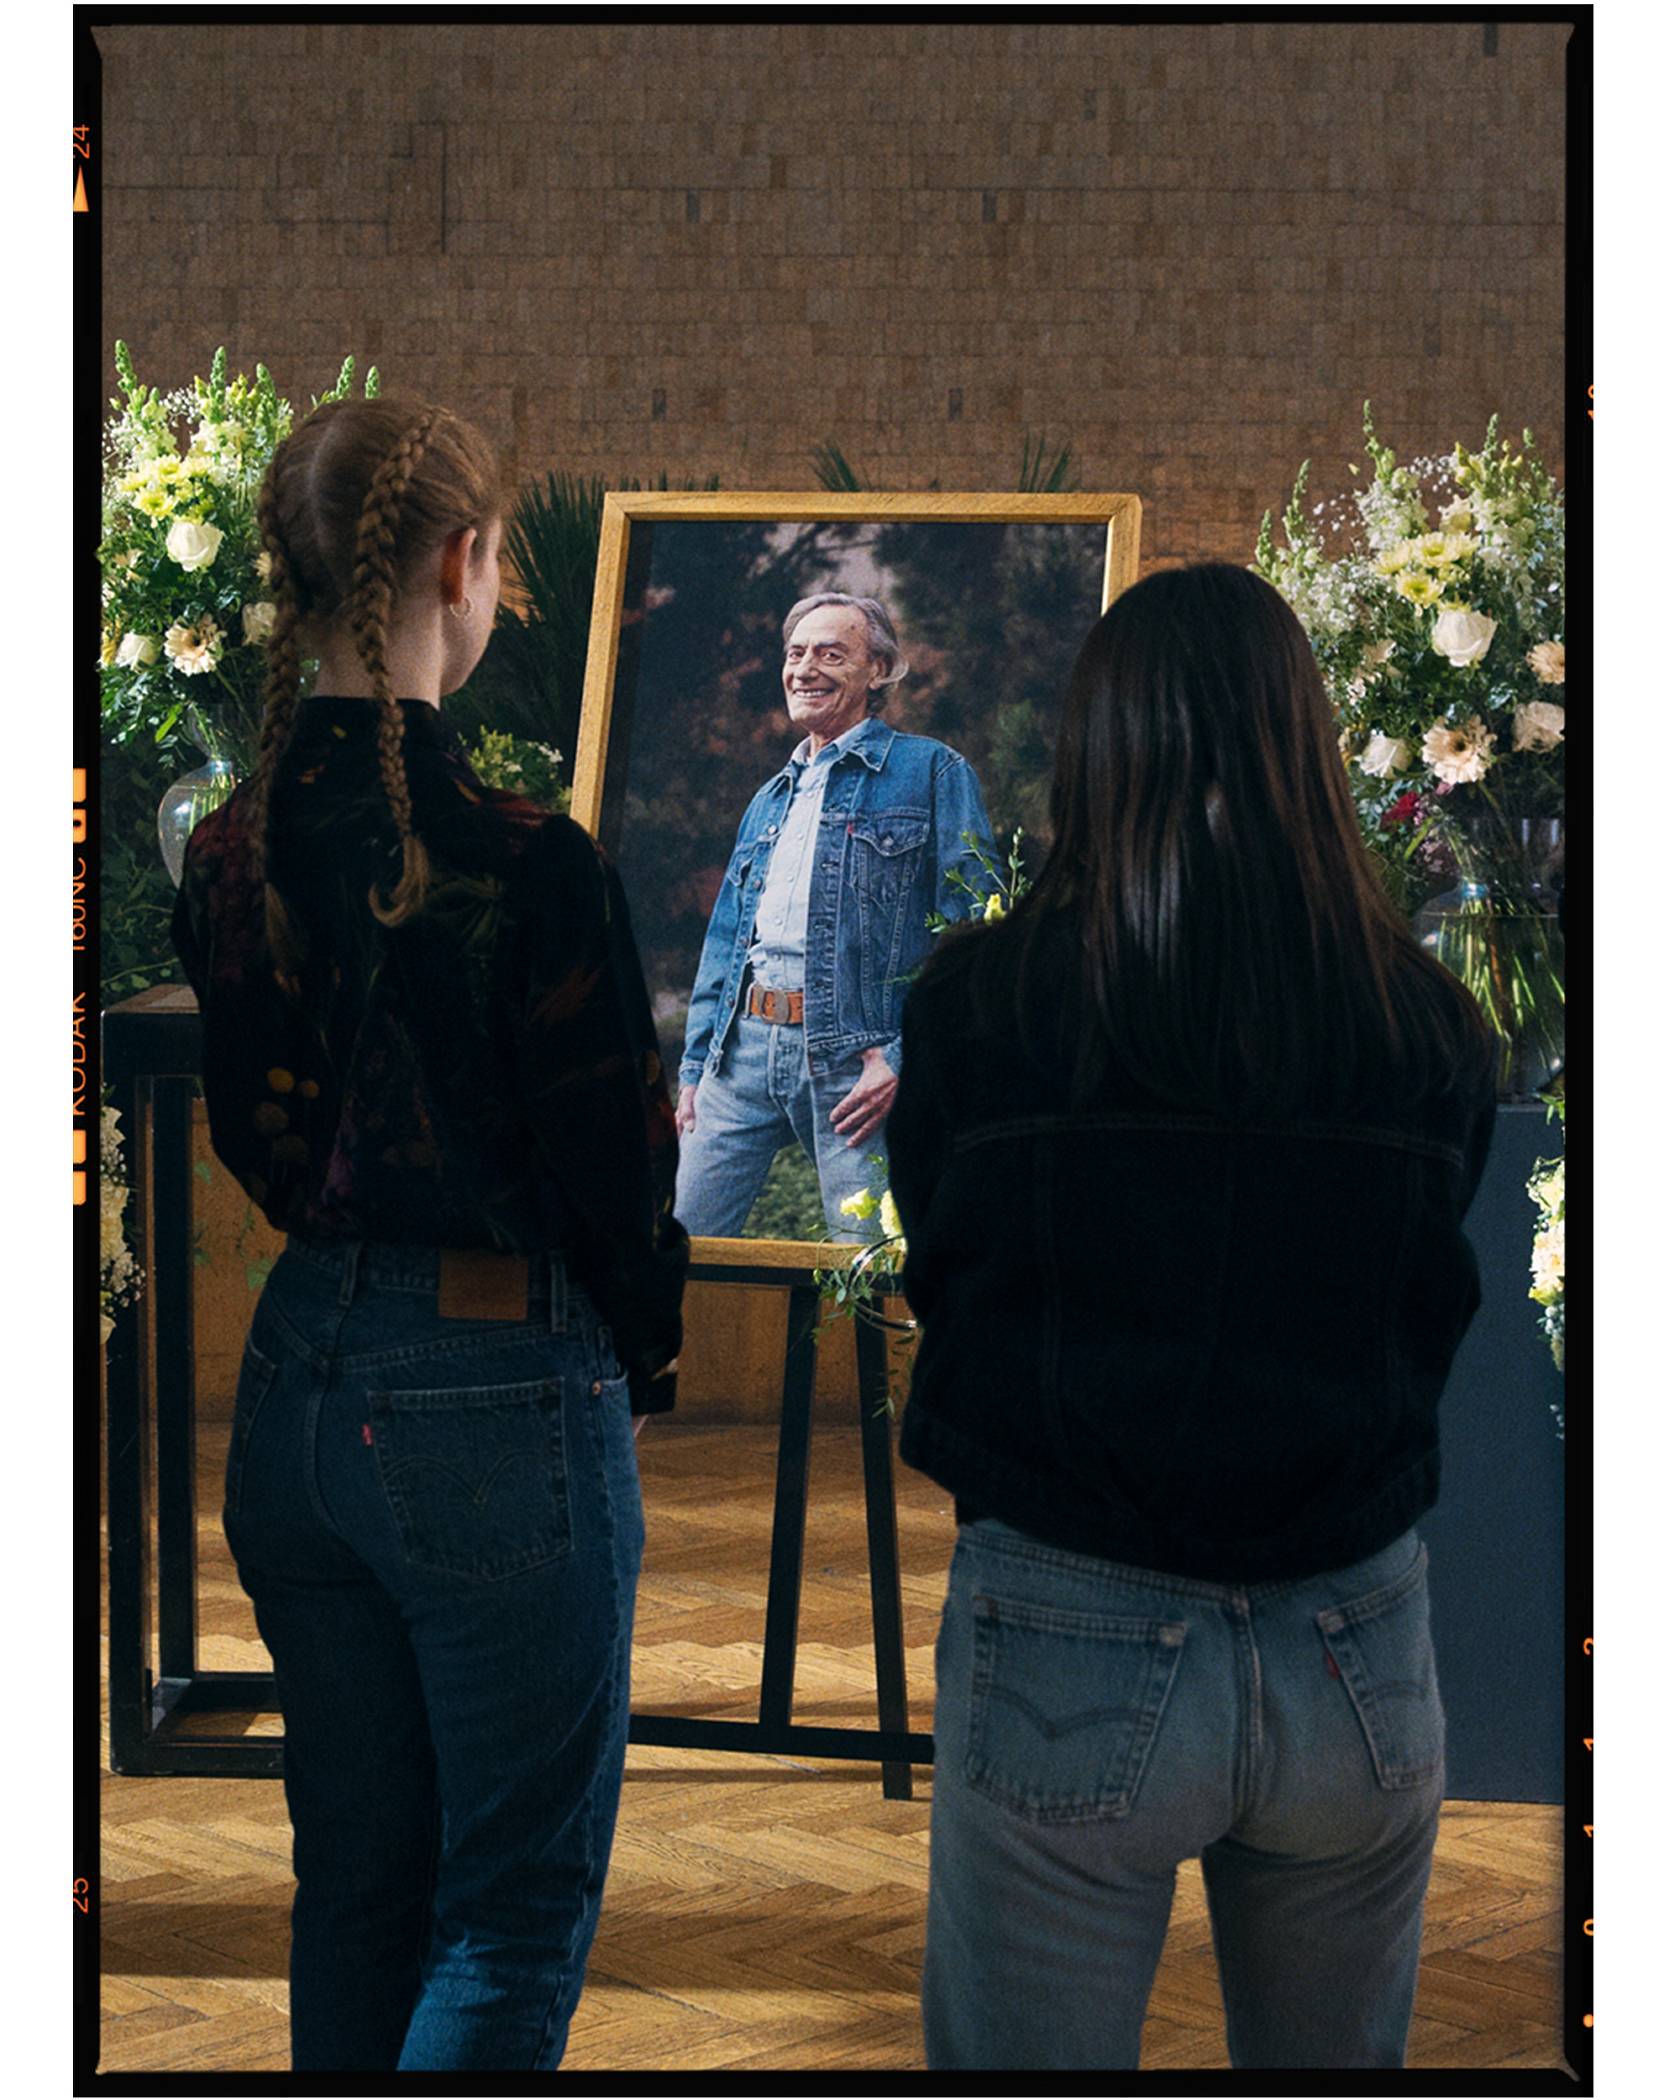 People wearing Levi's jeans at a funeral looking at a picture of the person who passed who is wearing Levi's jeans and a Trucker Jacket.